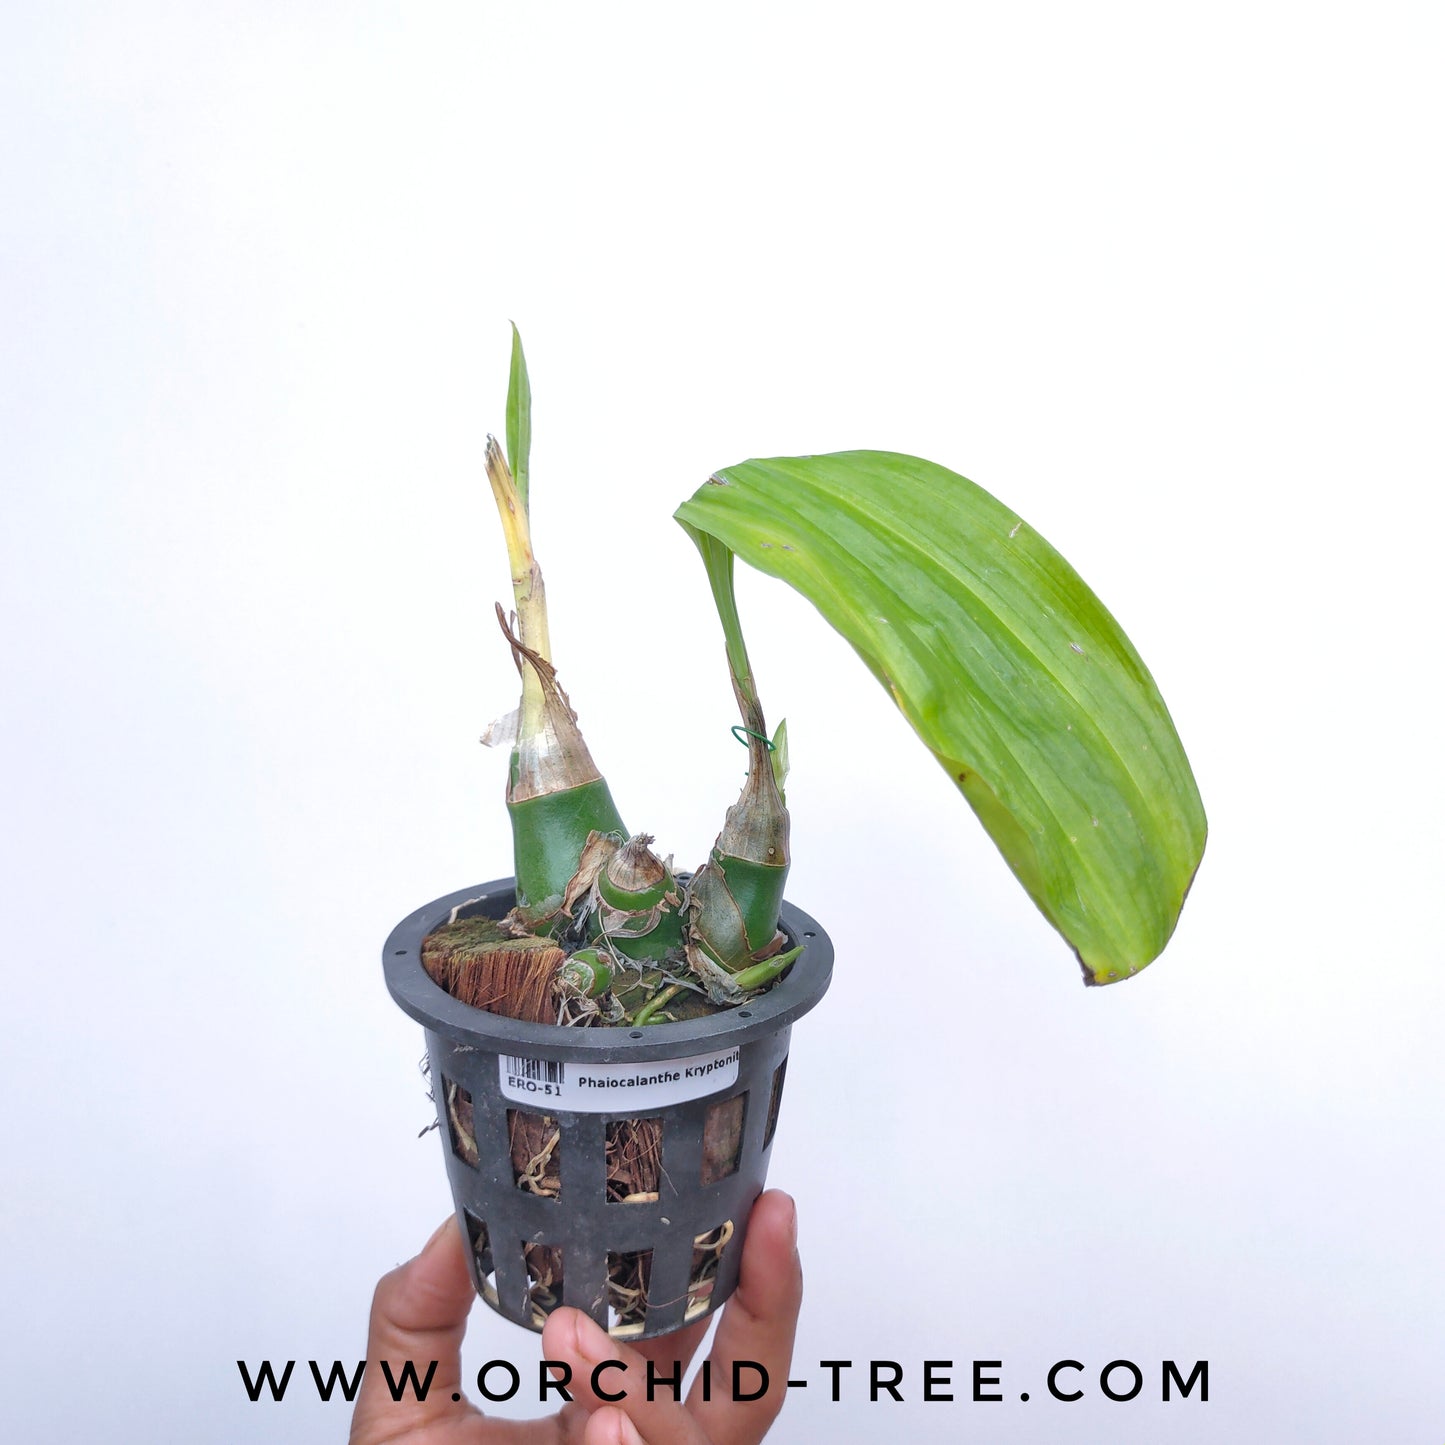 Phaiocalanthe Kryptonite - BS - Buy Orchids Plants Online by Orchid-Tree.com